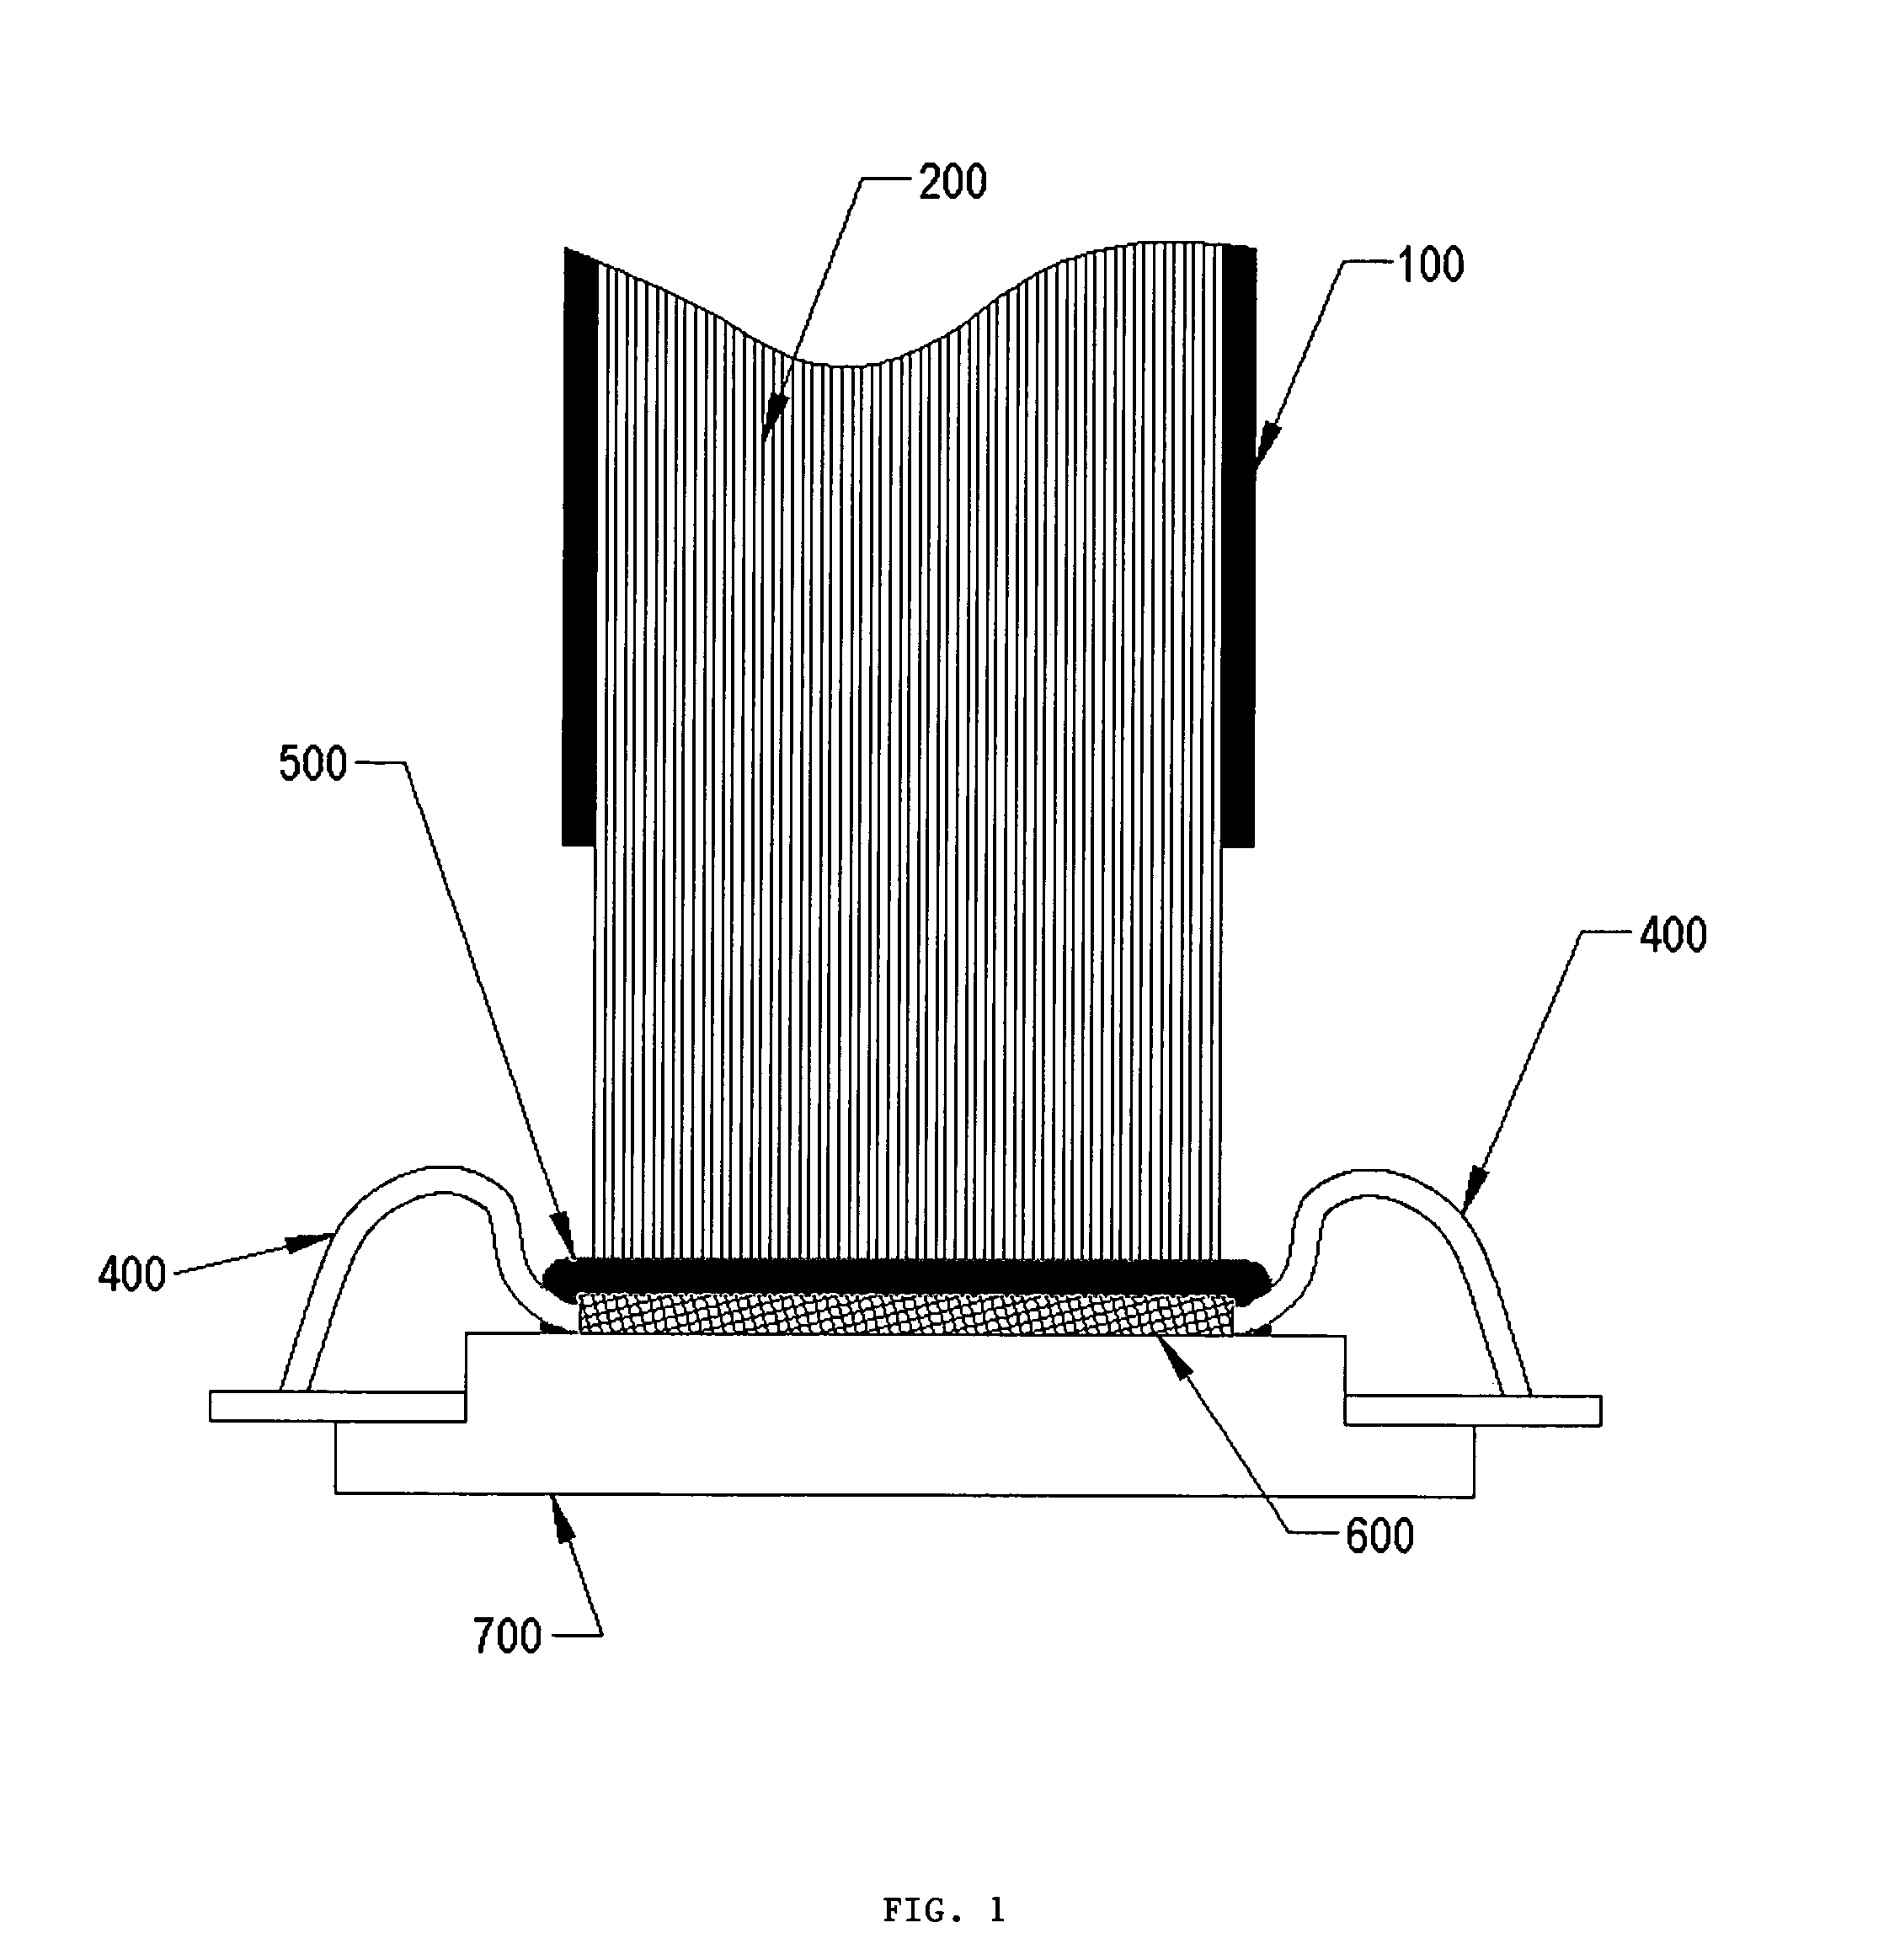 Compact, high-efficiency, high-power solid state light source using a single solid state light-emitting device